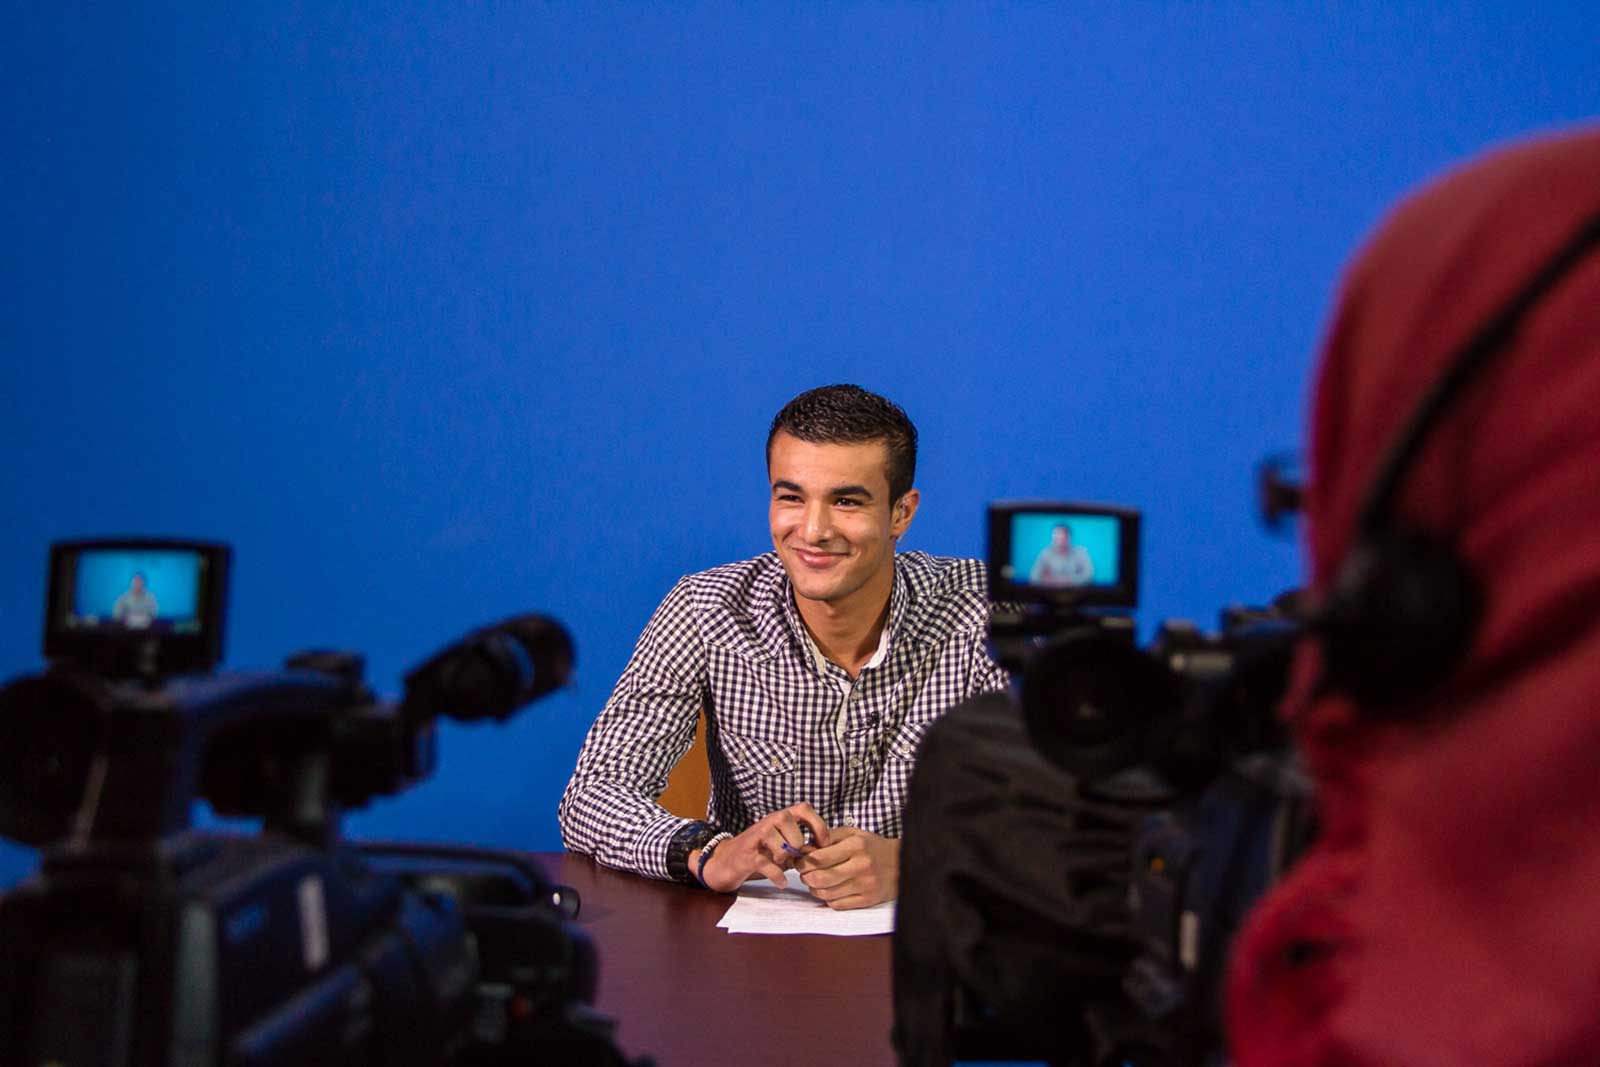 IWPR interns producing a television report as part of a course at the Media Lab of the University of Tripoli, March 2014. © IWPR